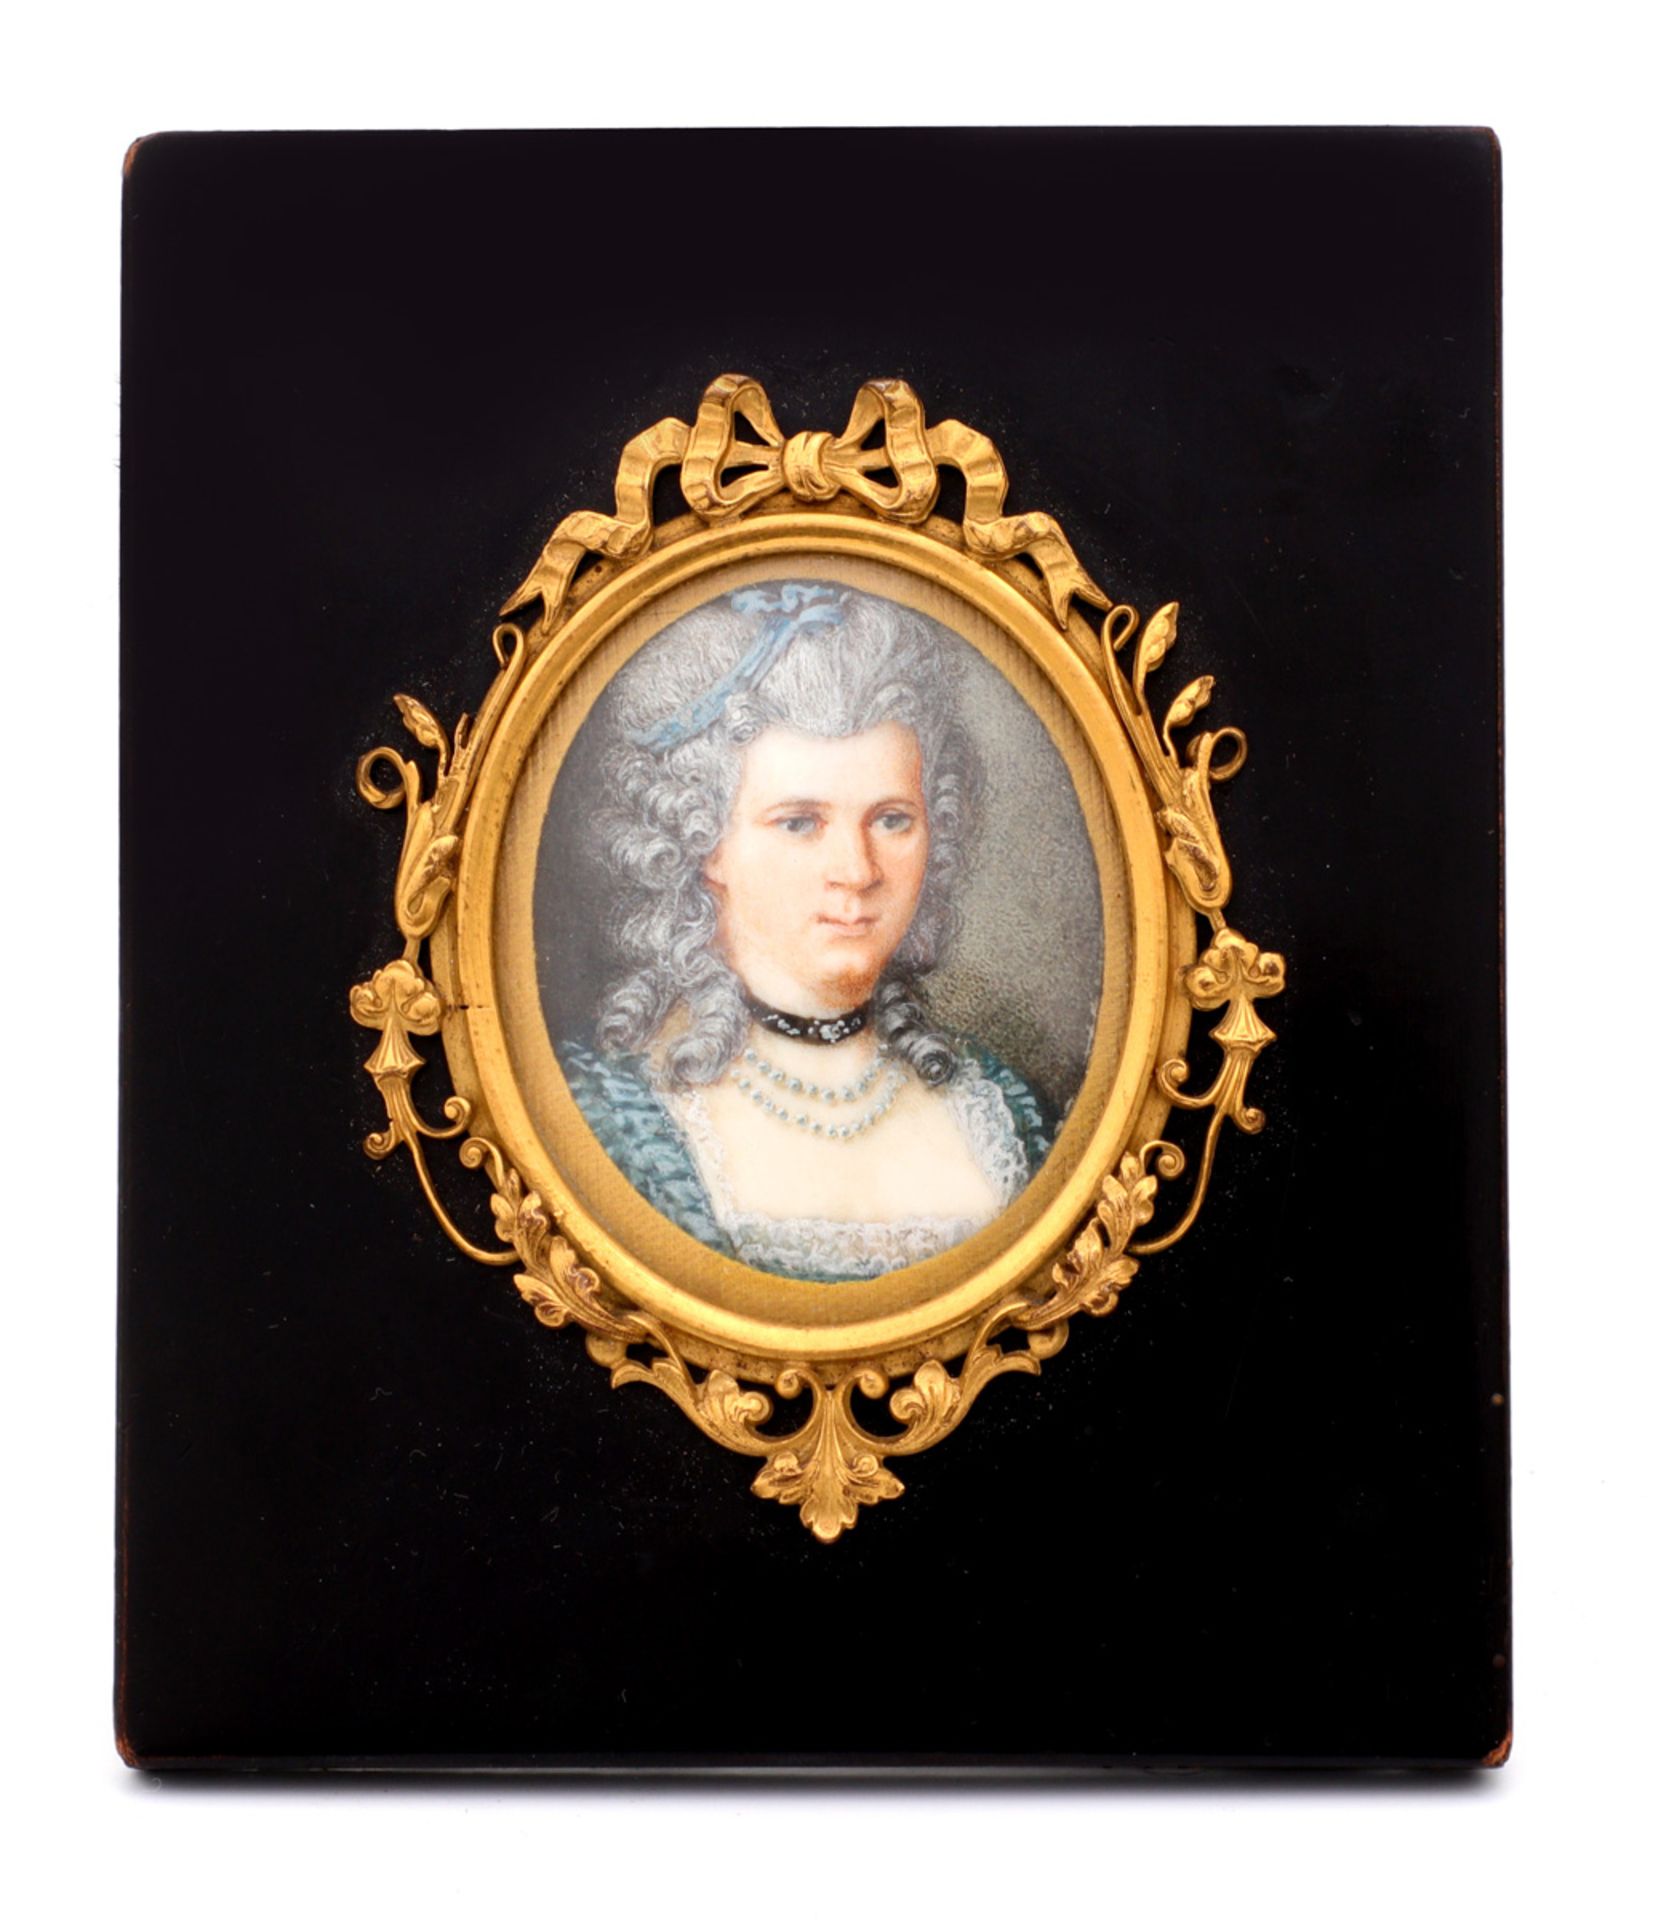 FRENCH SCHOOL (19TH CENTURY), PORTRAIT OF A LADY Miniature on ivory, depicting 18th Century